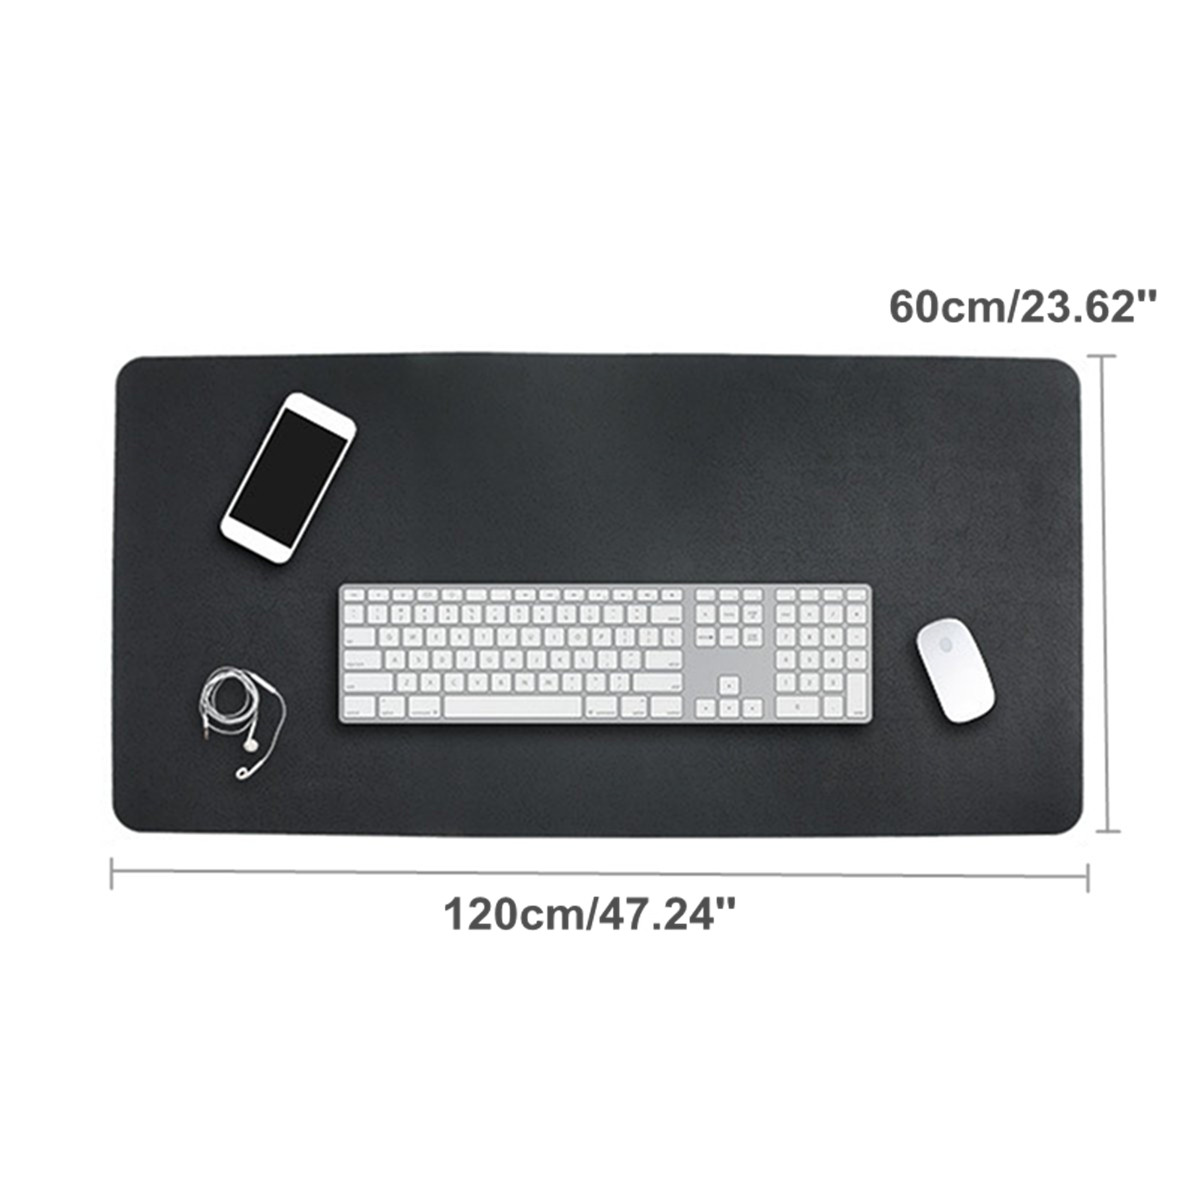 120x60cm Both Sides Two Colors PU leather Mouse Pad Mat Large Office Gaming Desk Mat 69